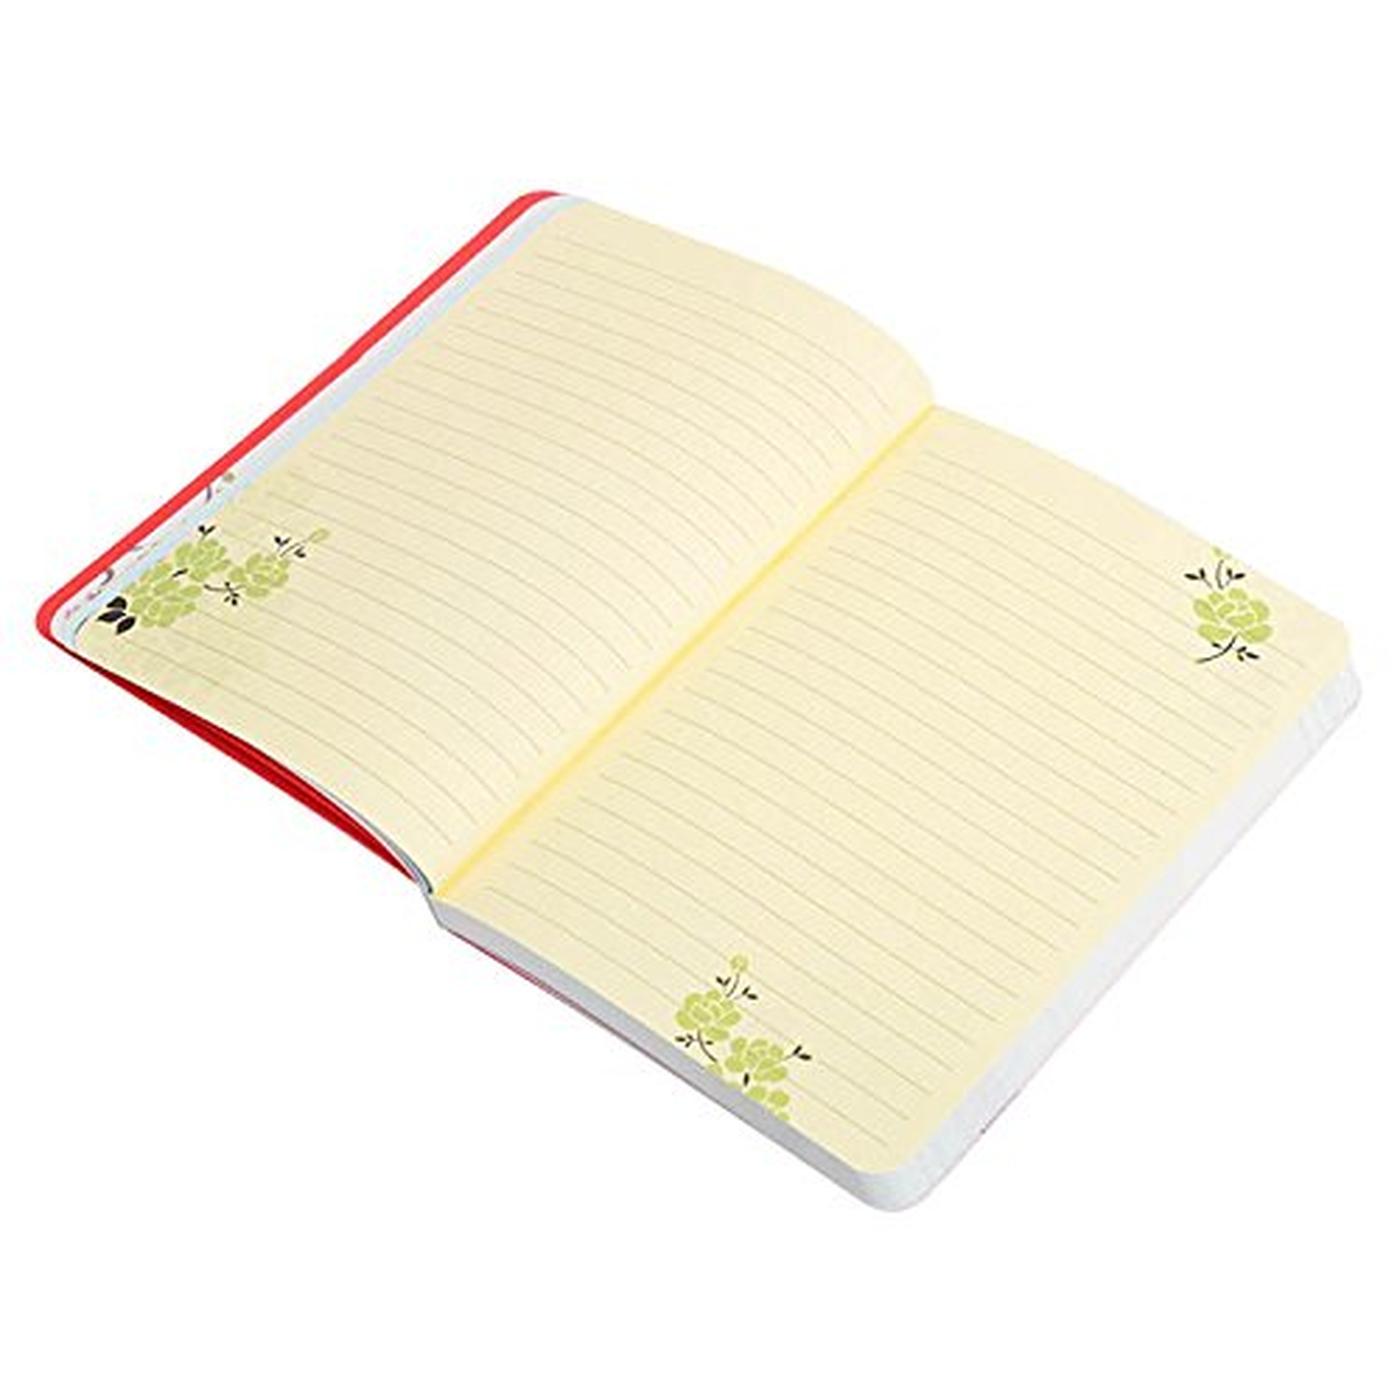 Doodle Initial Y Monogram Soft Bound B6 Notebook